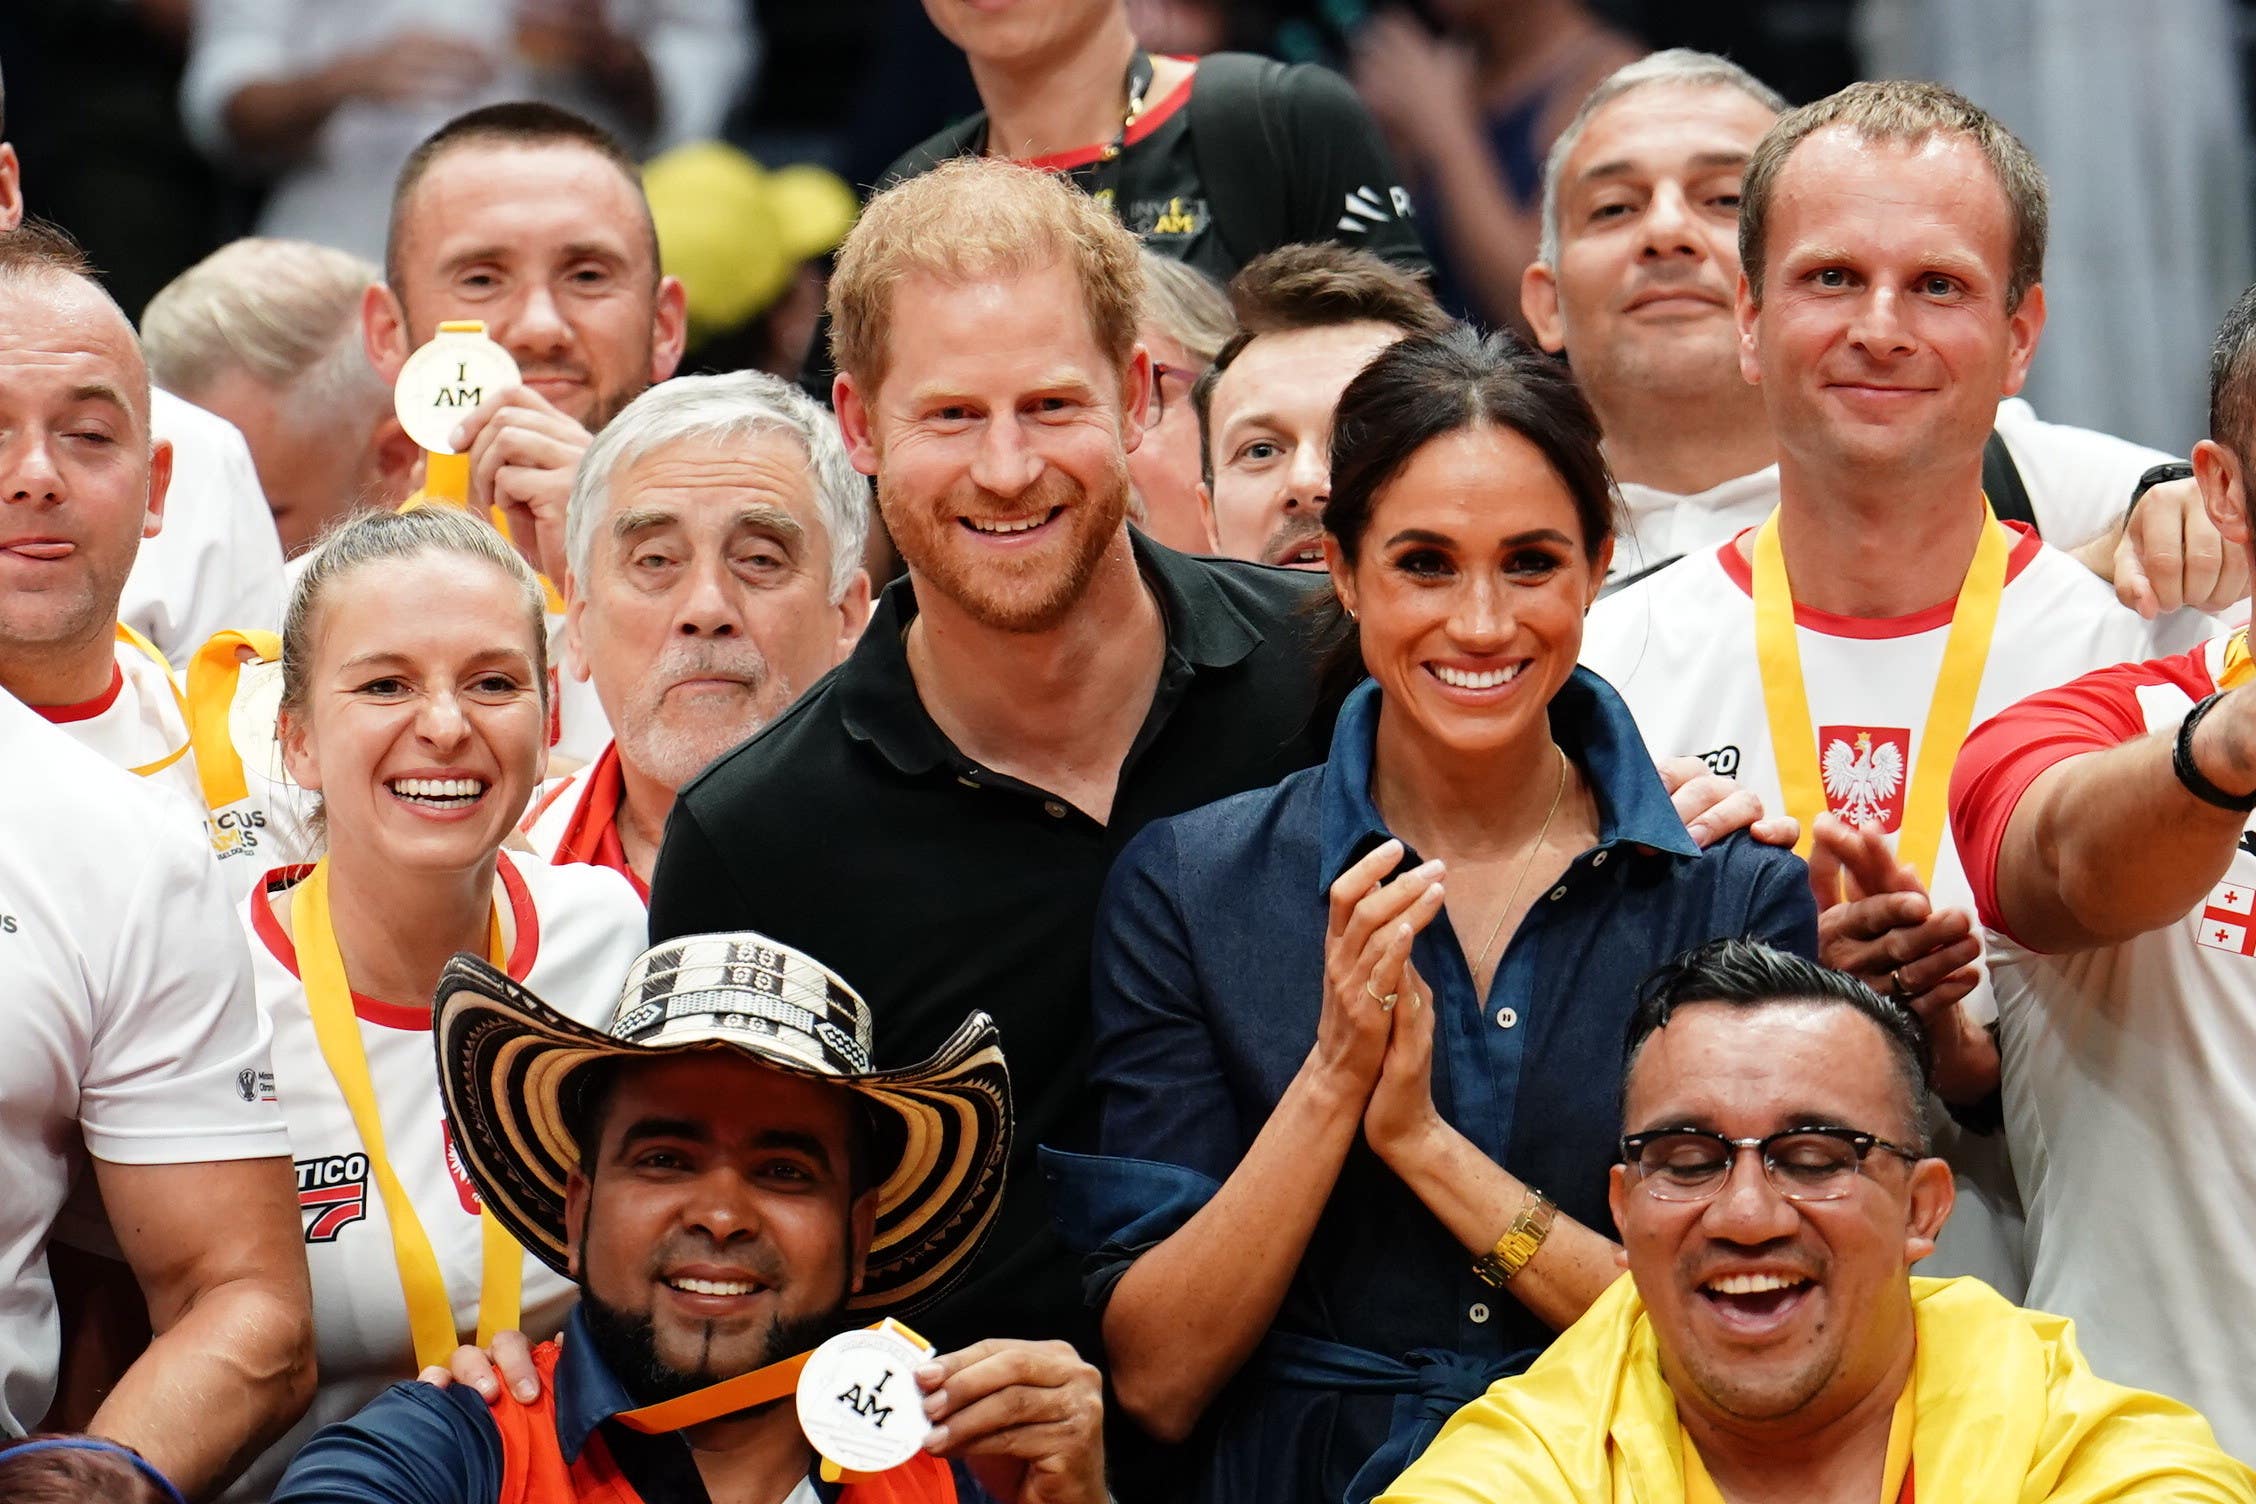 The Duke and Duchess of Sussex with medal winners during the Invictus Games in Dusseldorf, Germany (Jordan Pettitt/PA)